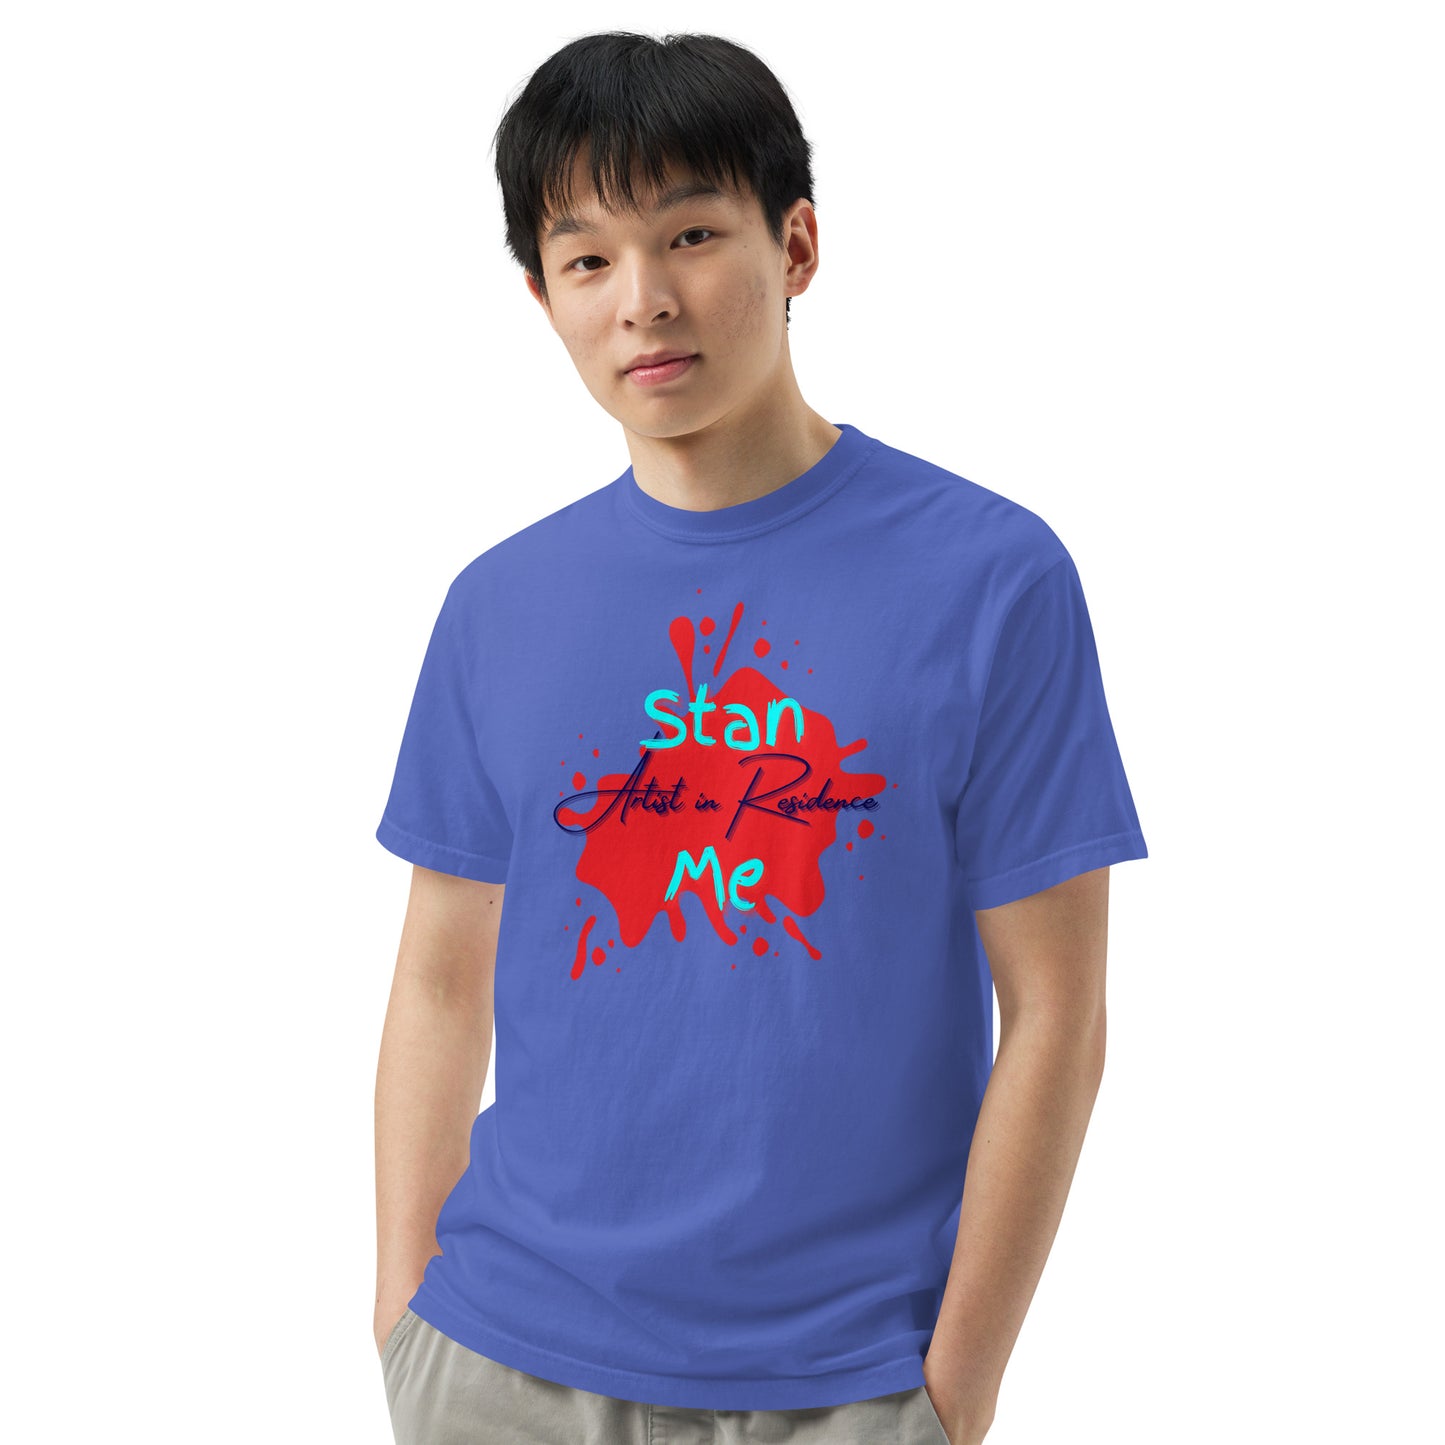 “Stan Me, Artist in Residence” tees featuring paint splatter designs, blending artistic creativity with stan culture. Available in 8 unique styles. Perfect for artists looking to attract fans and gigs. purple blue tee